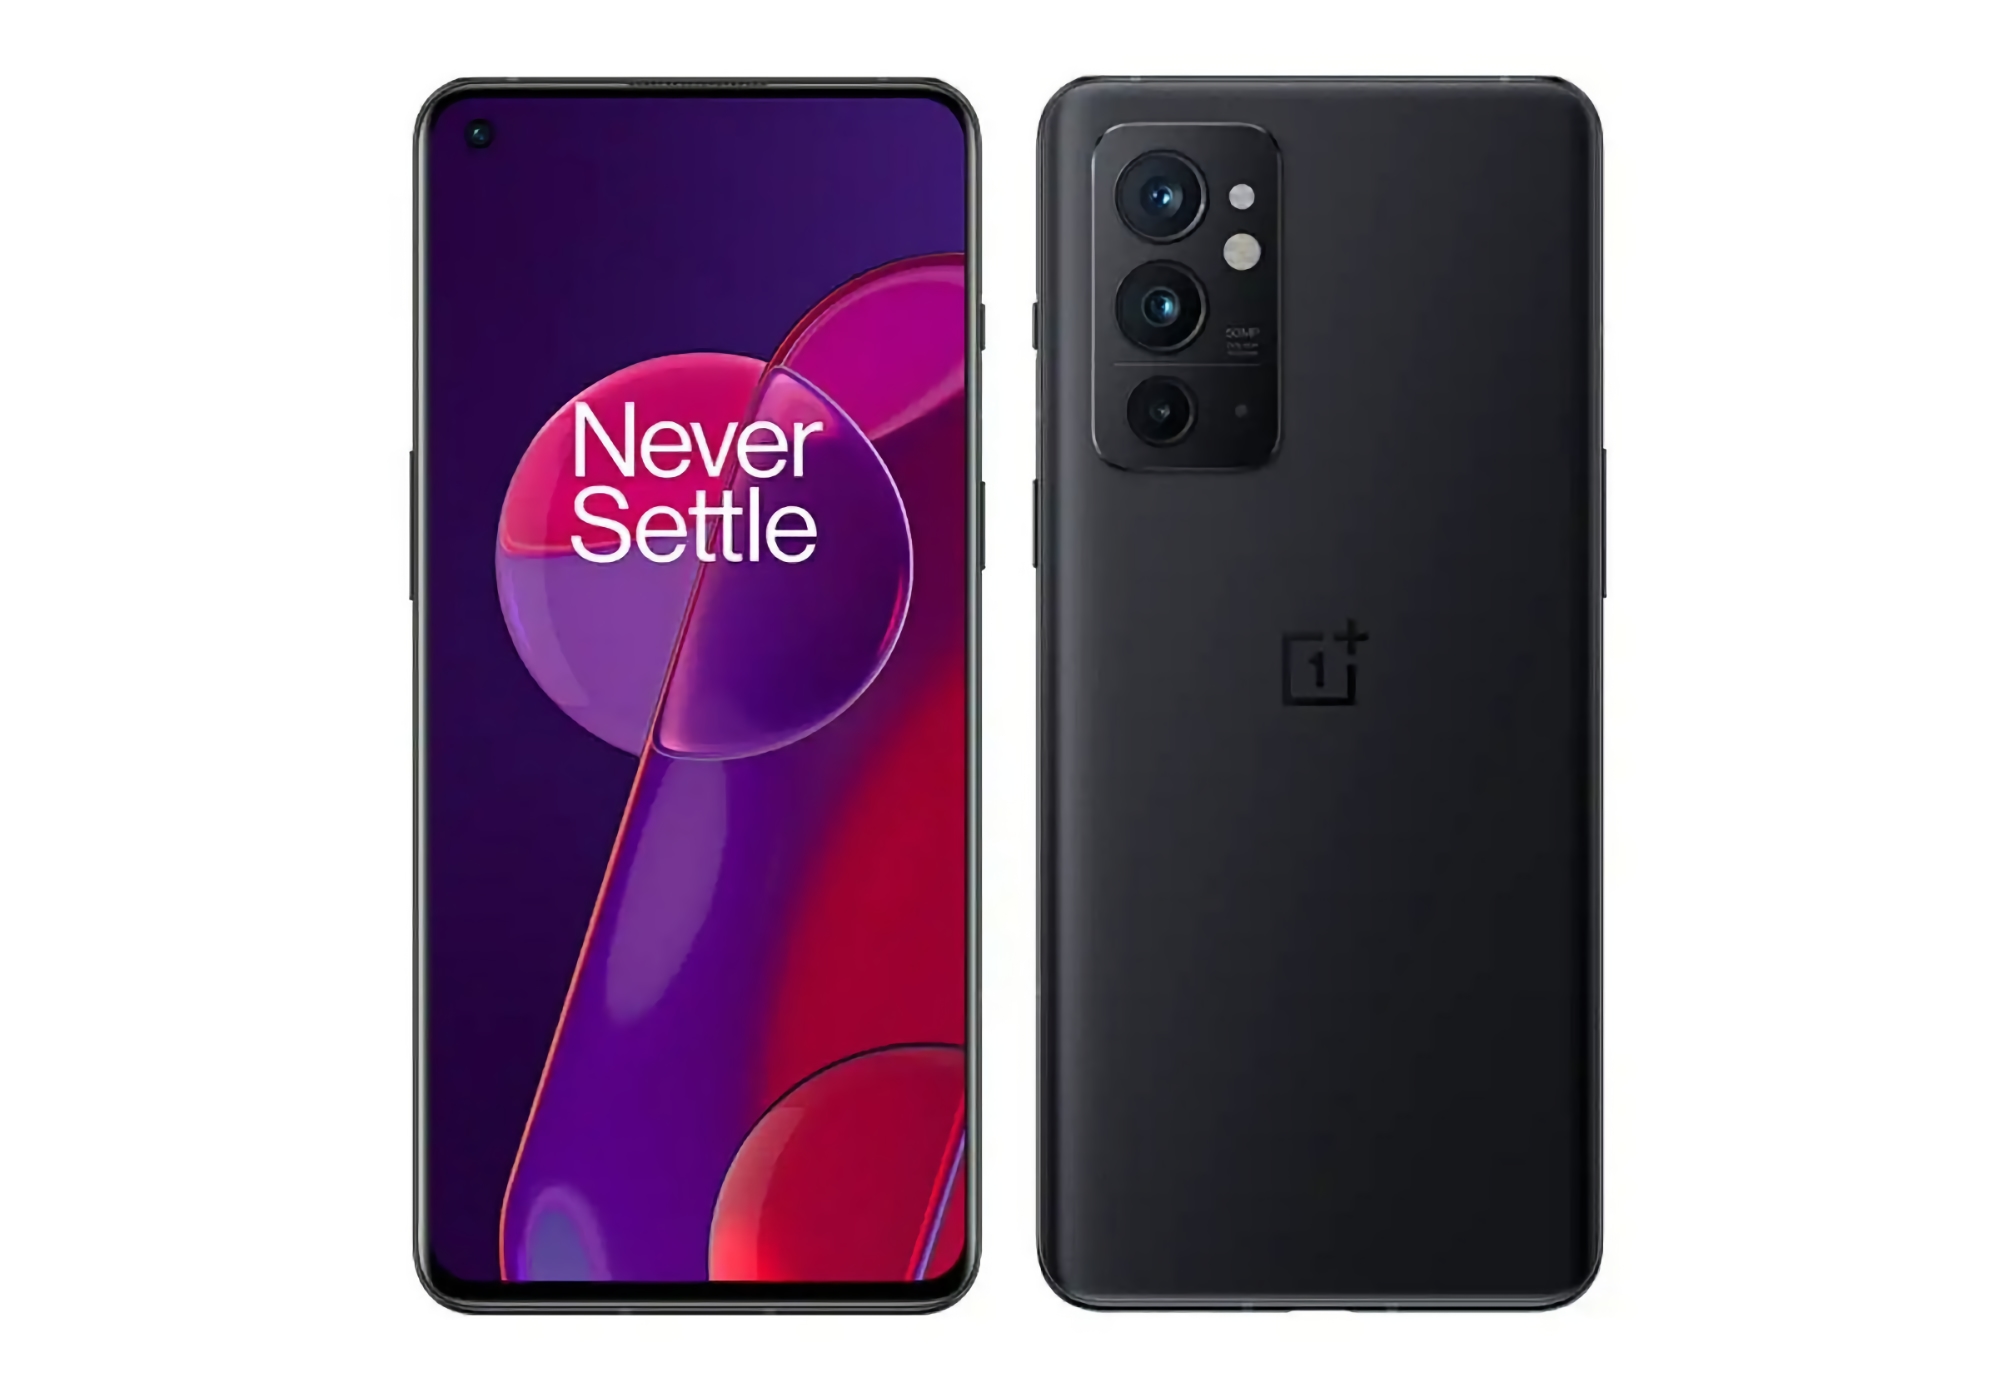 OnePlus 9RT in Hacker Black coloration appeared on quality press renders